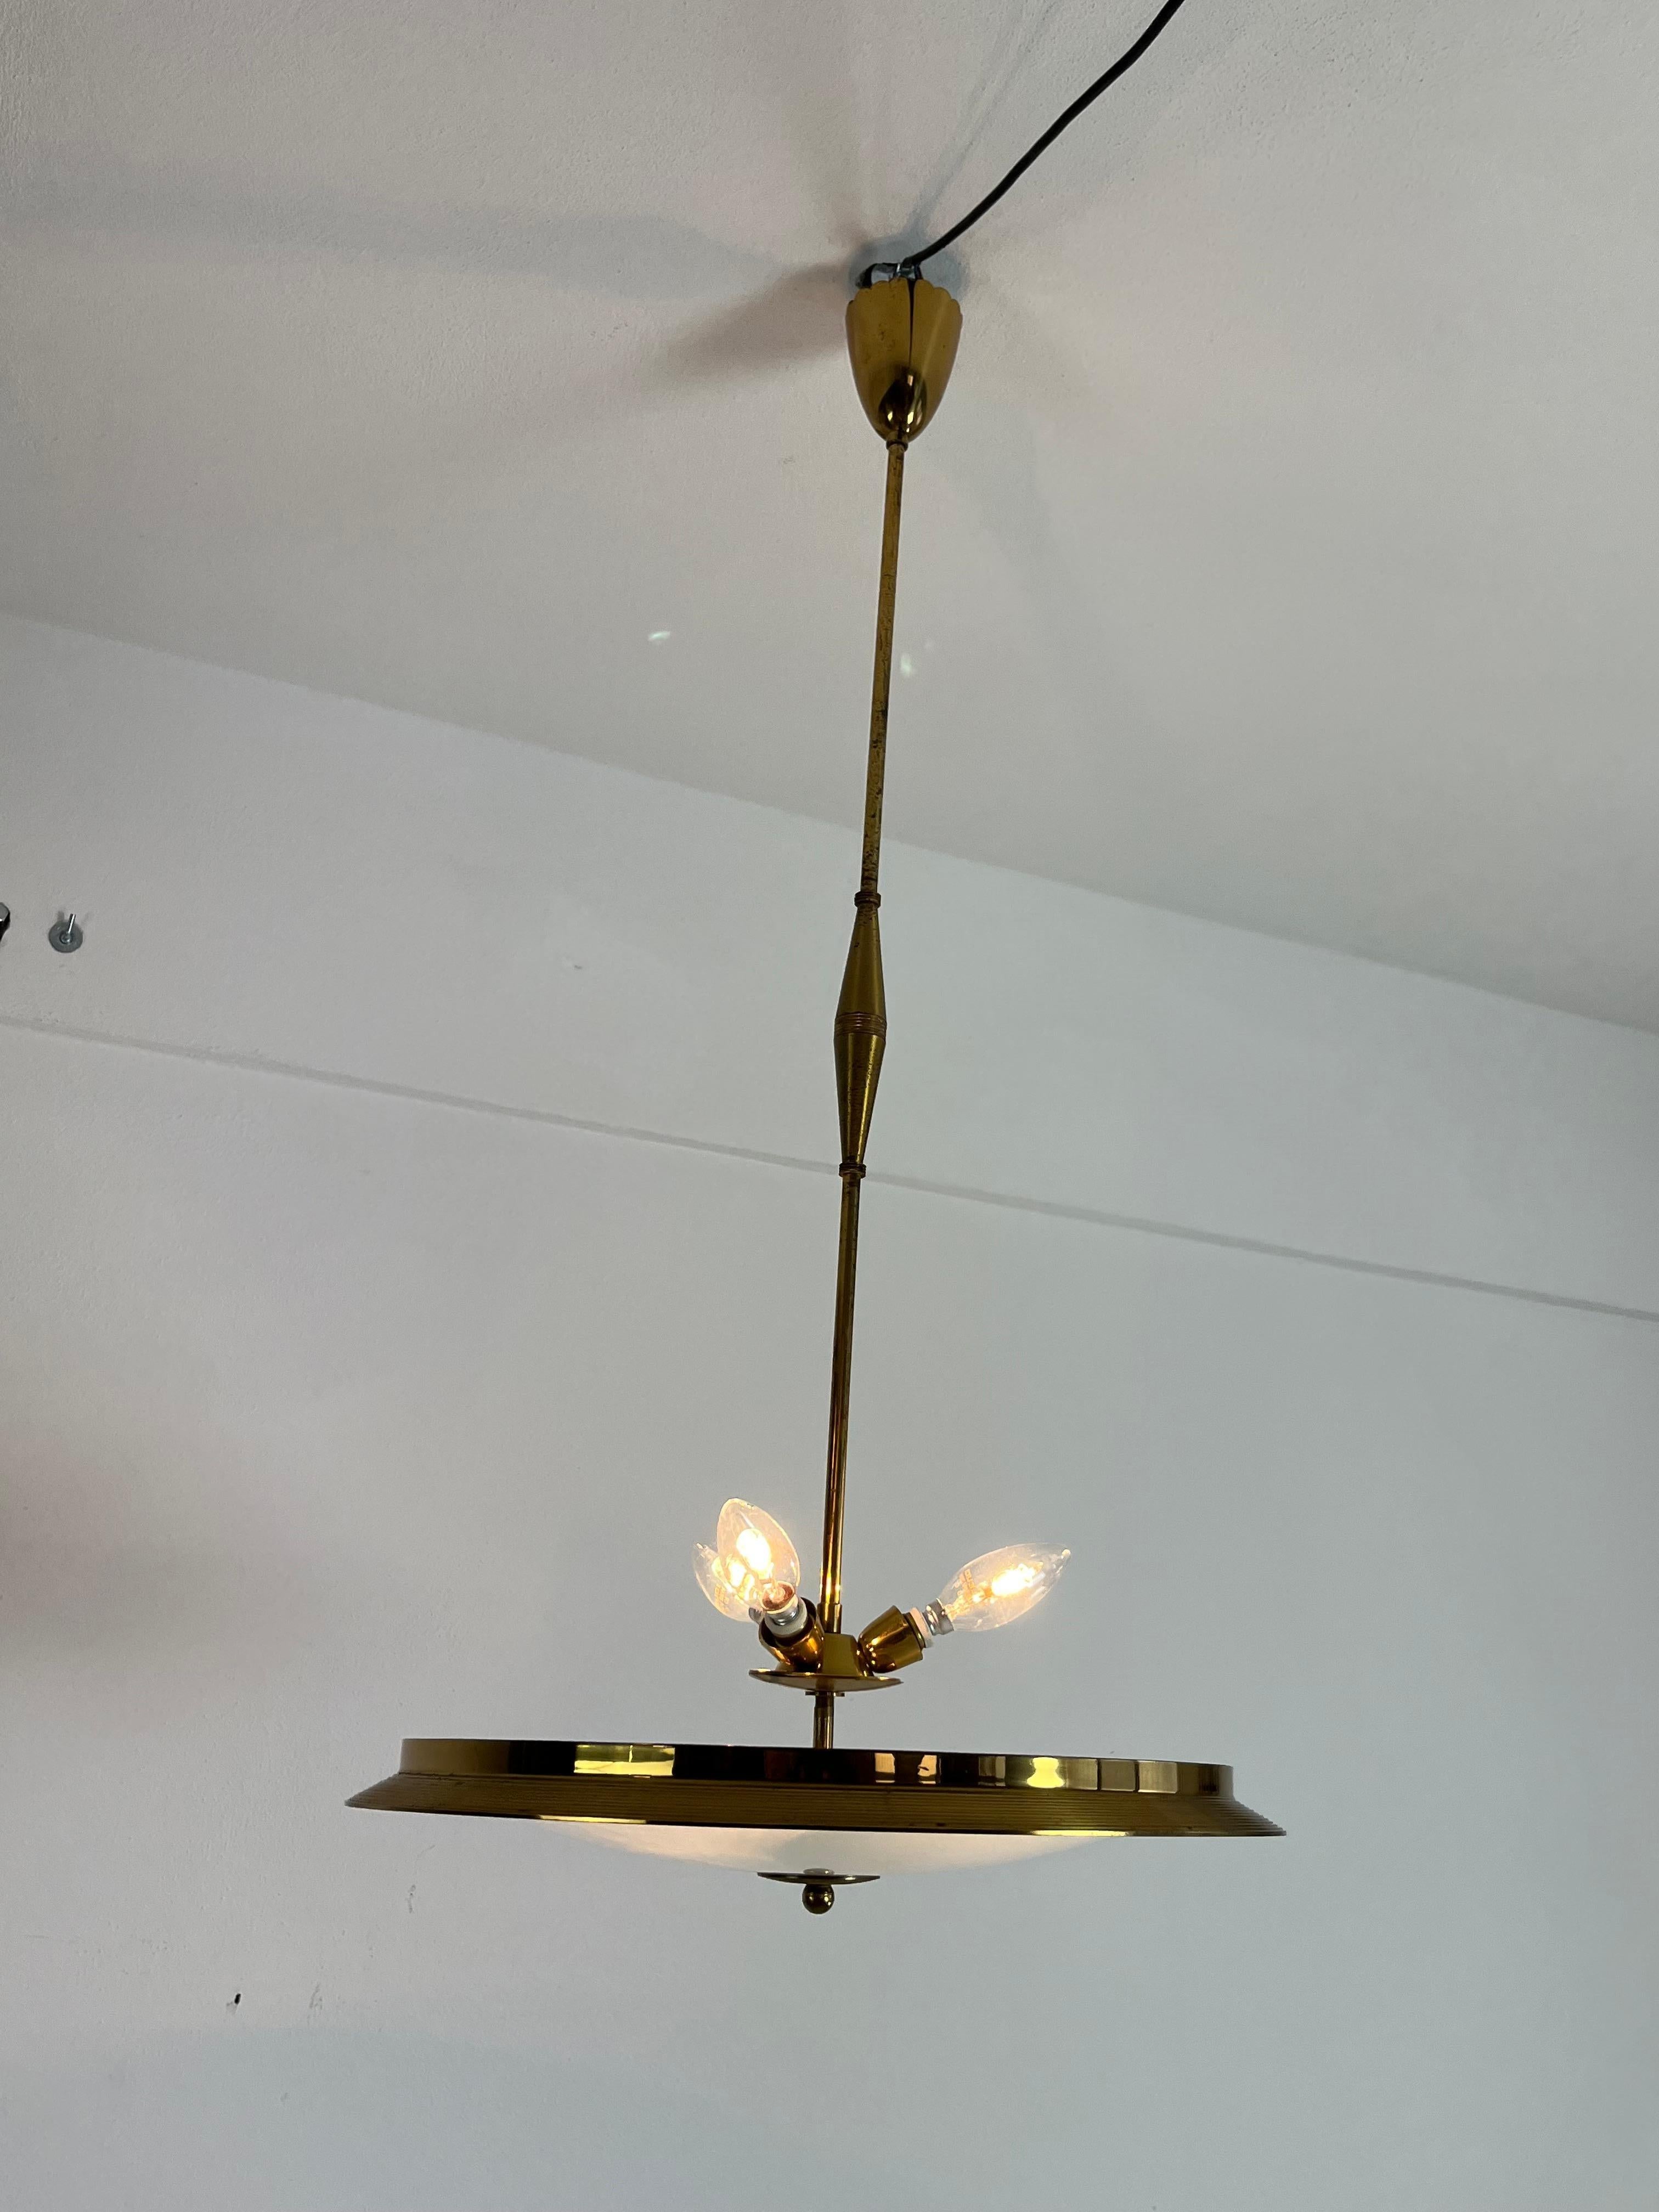 Brass and Murano glass chandelier, Italian design 1950s
Three lights, e14 lamps.
Good condition, small signs of aging.